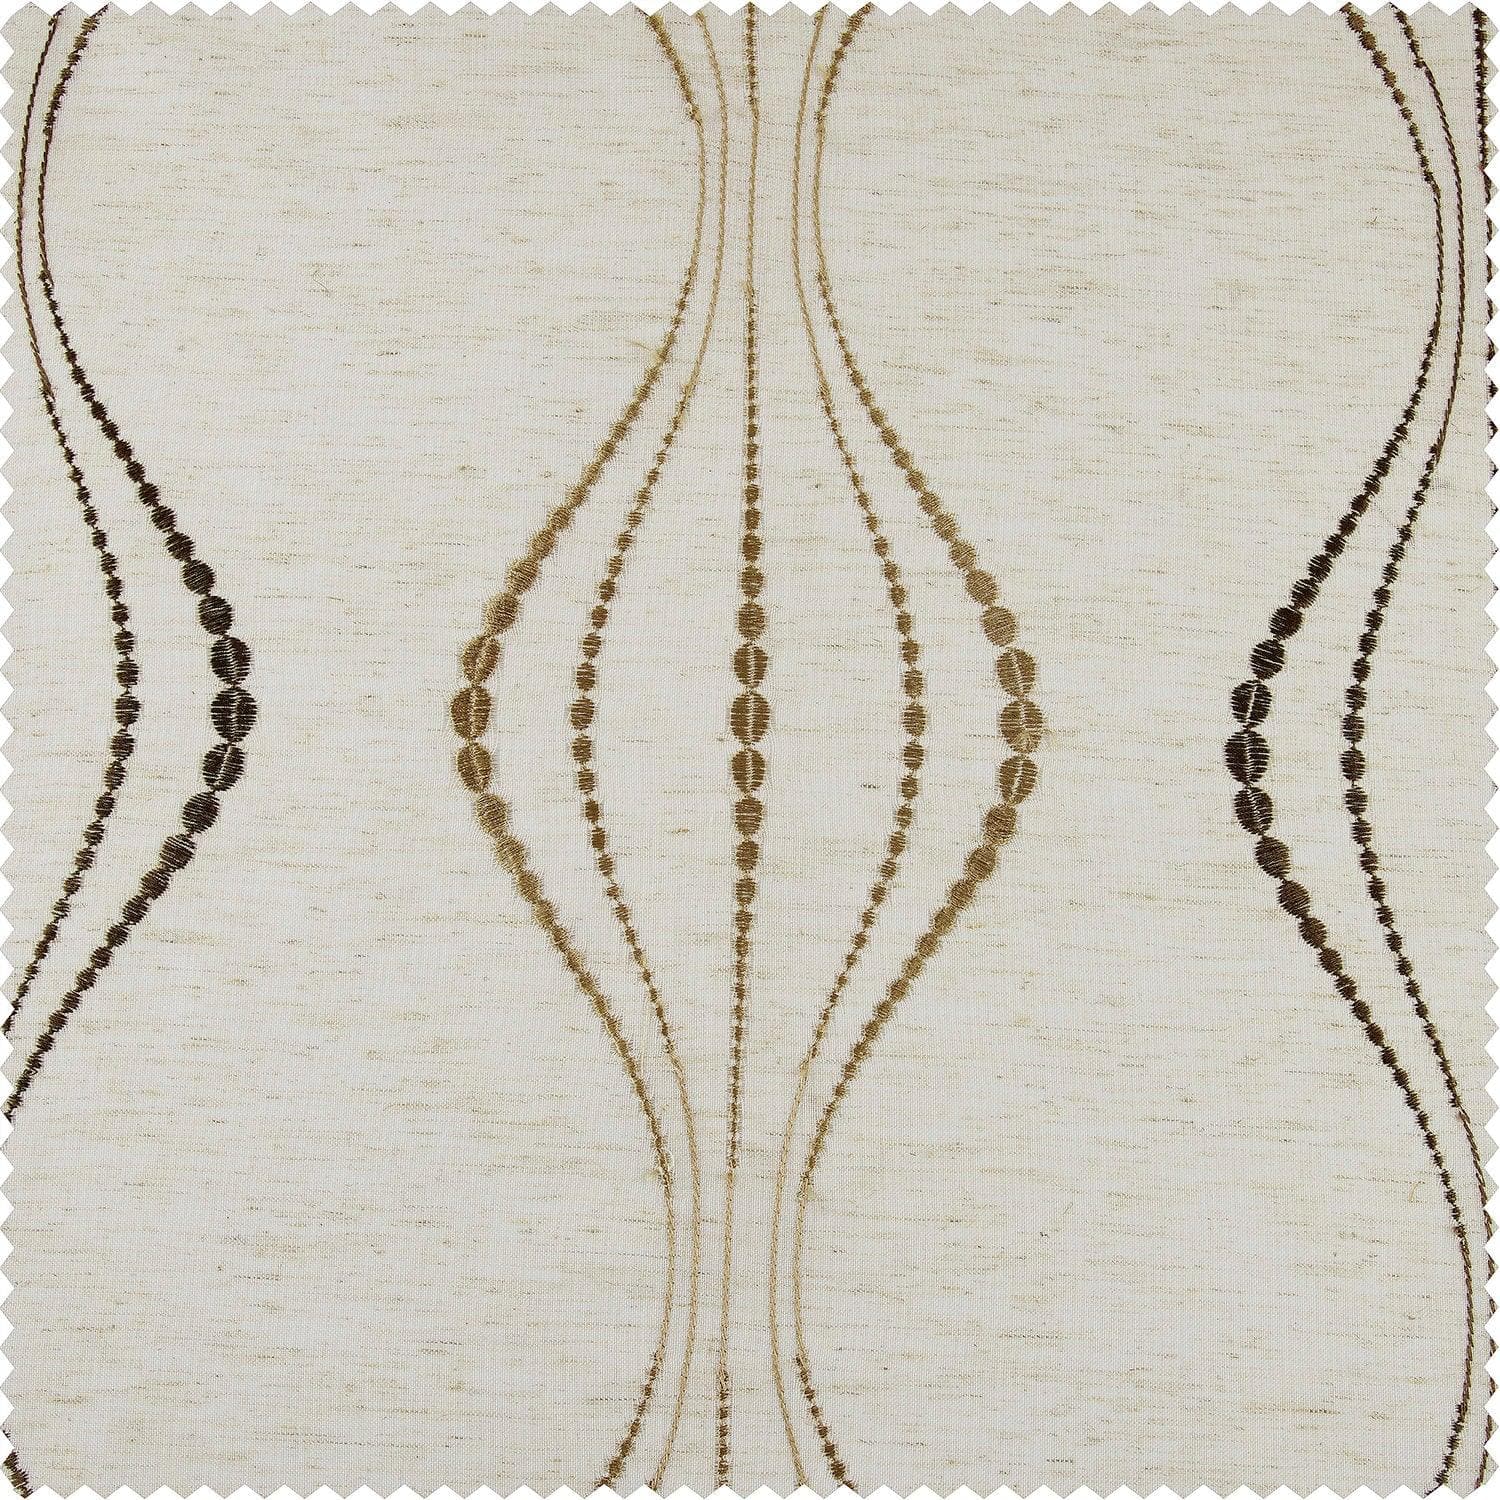 Suez Bronze Striped Embroidered Patterned Faux Linen Sheer Custom Curtain